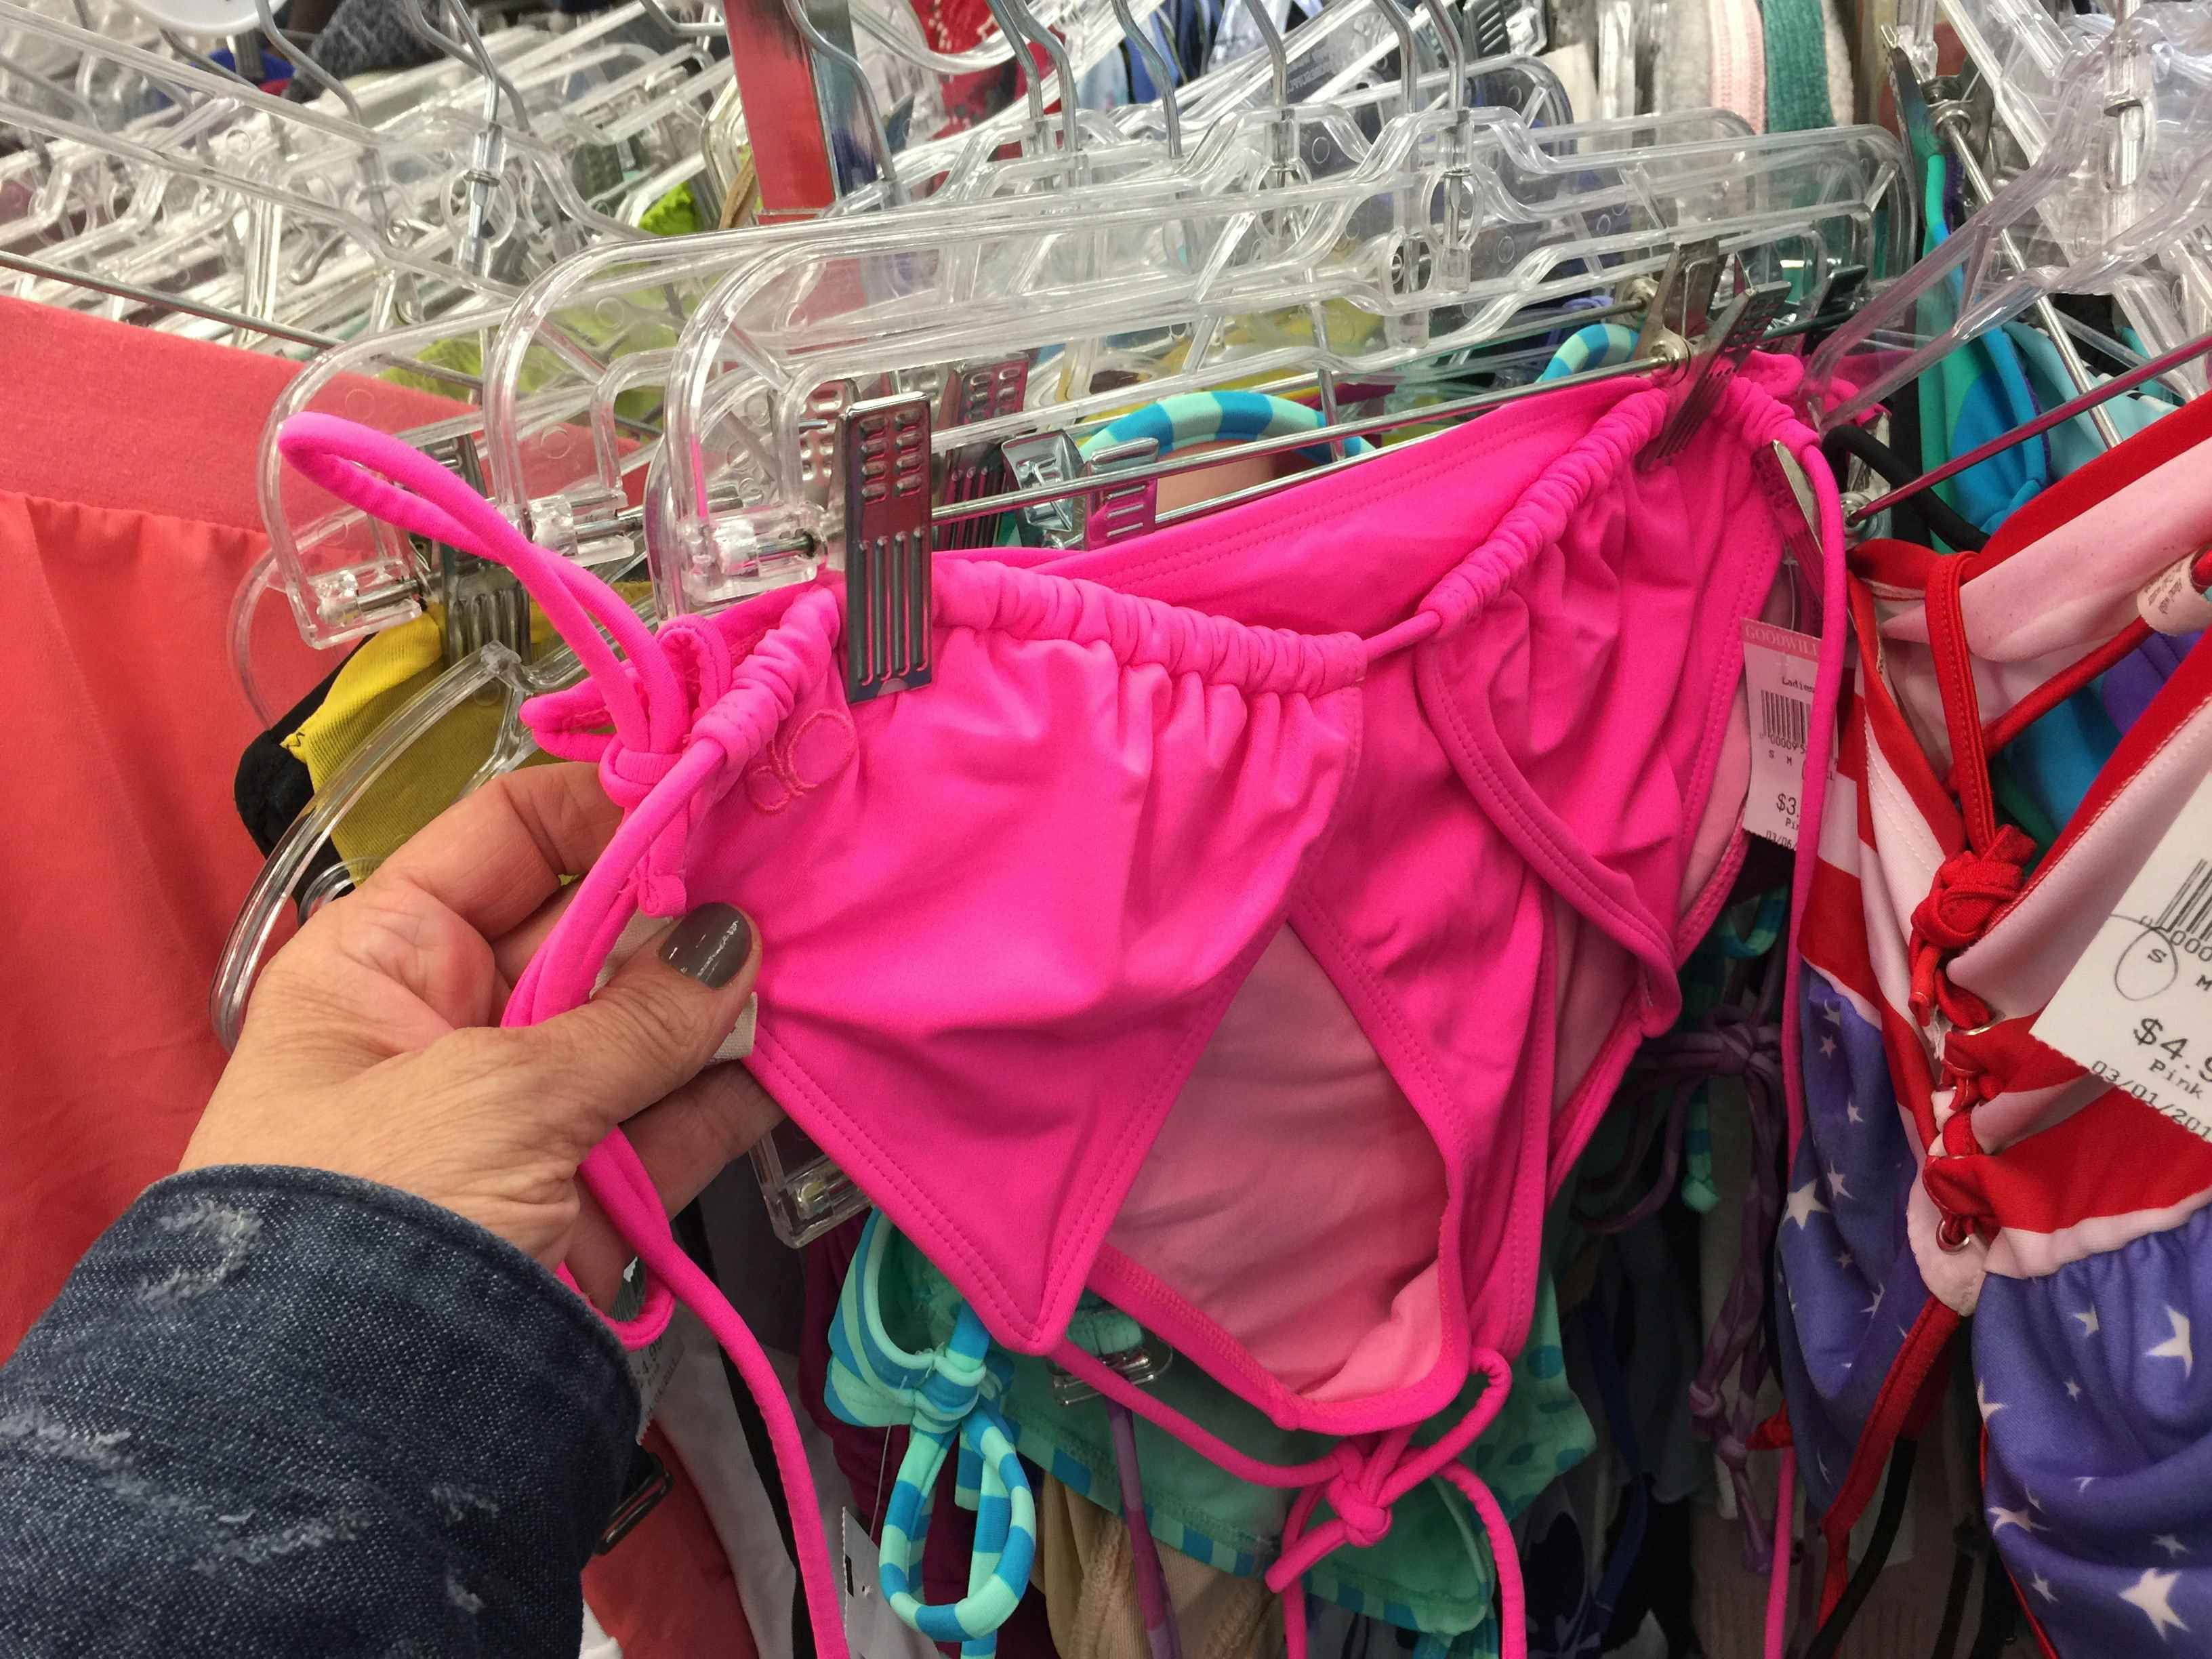 A person looking at a swimsuit on a rack at Goodwill